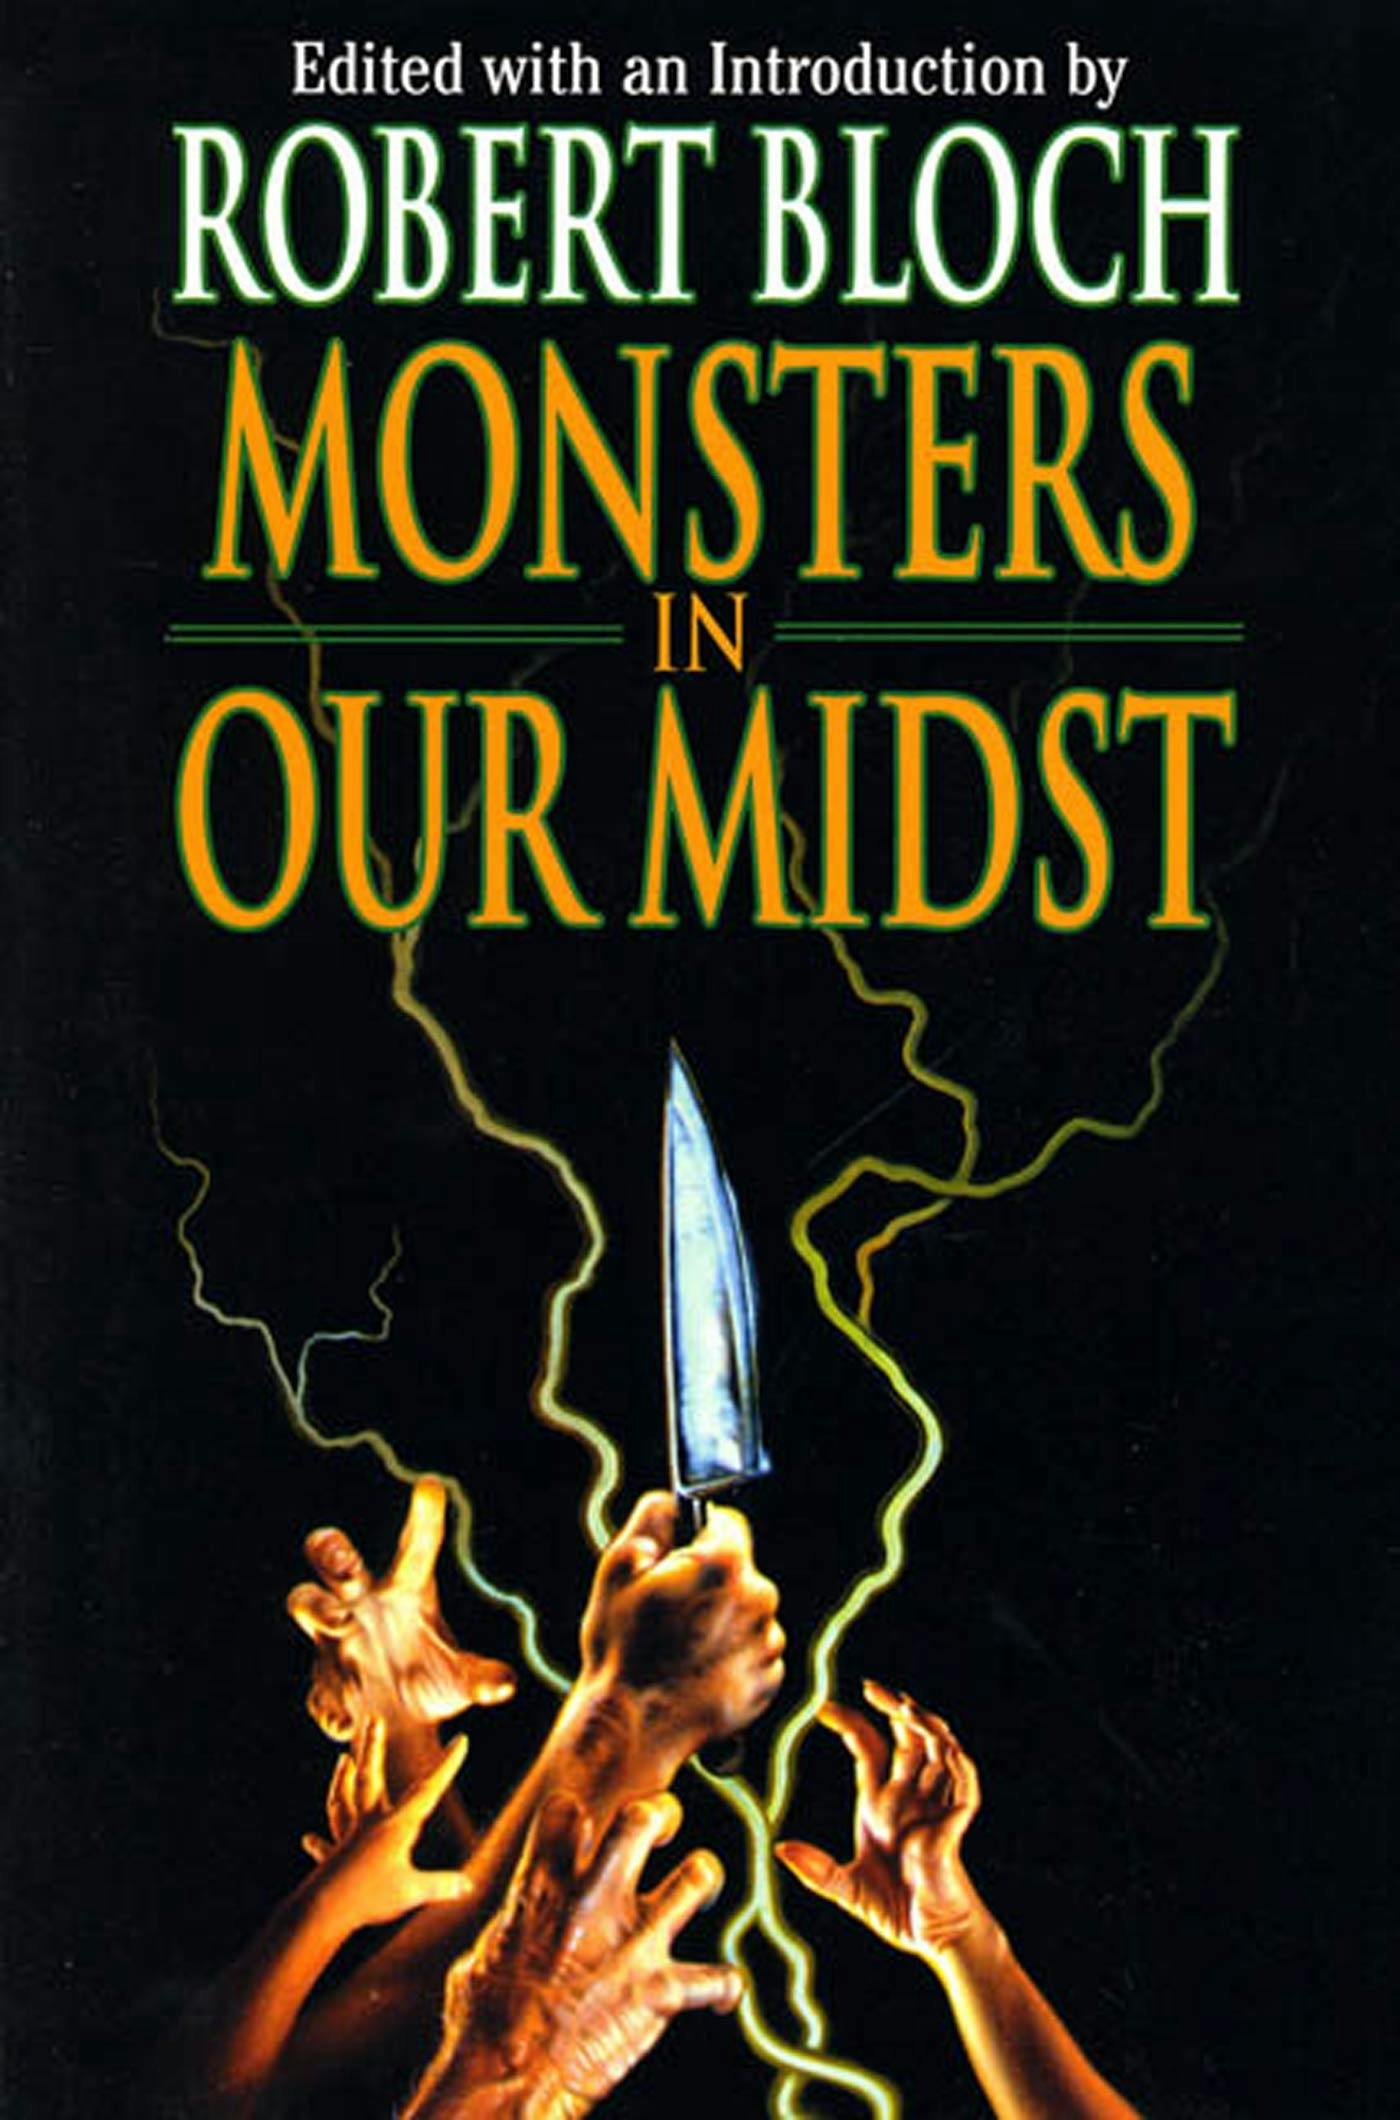 Cover for the book titled as: Monsters in Our Midst